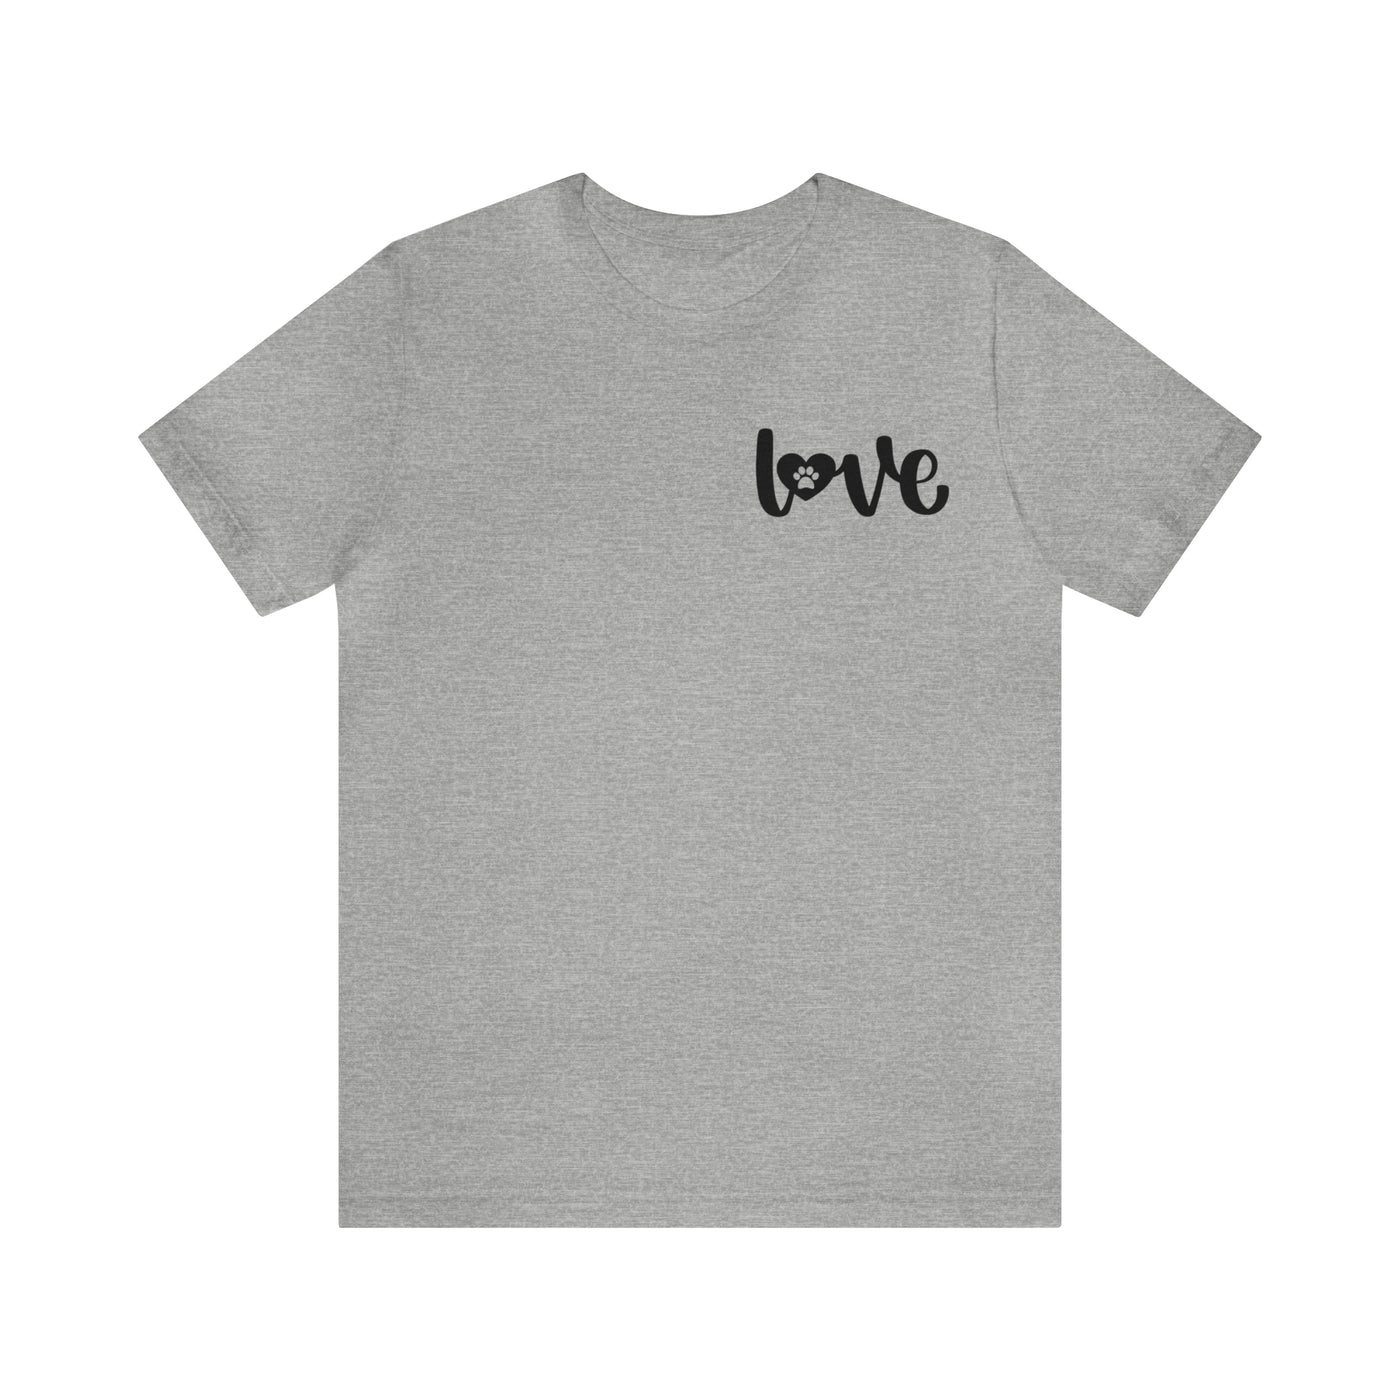 Love T-Shirt (Assorted Colors)